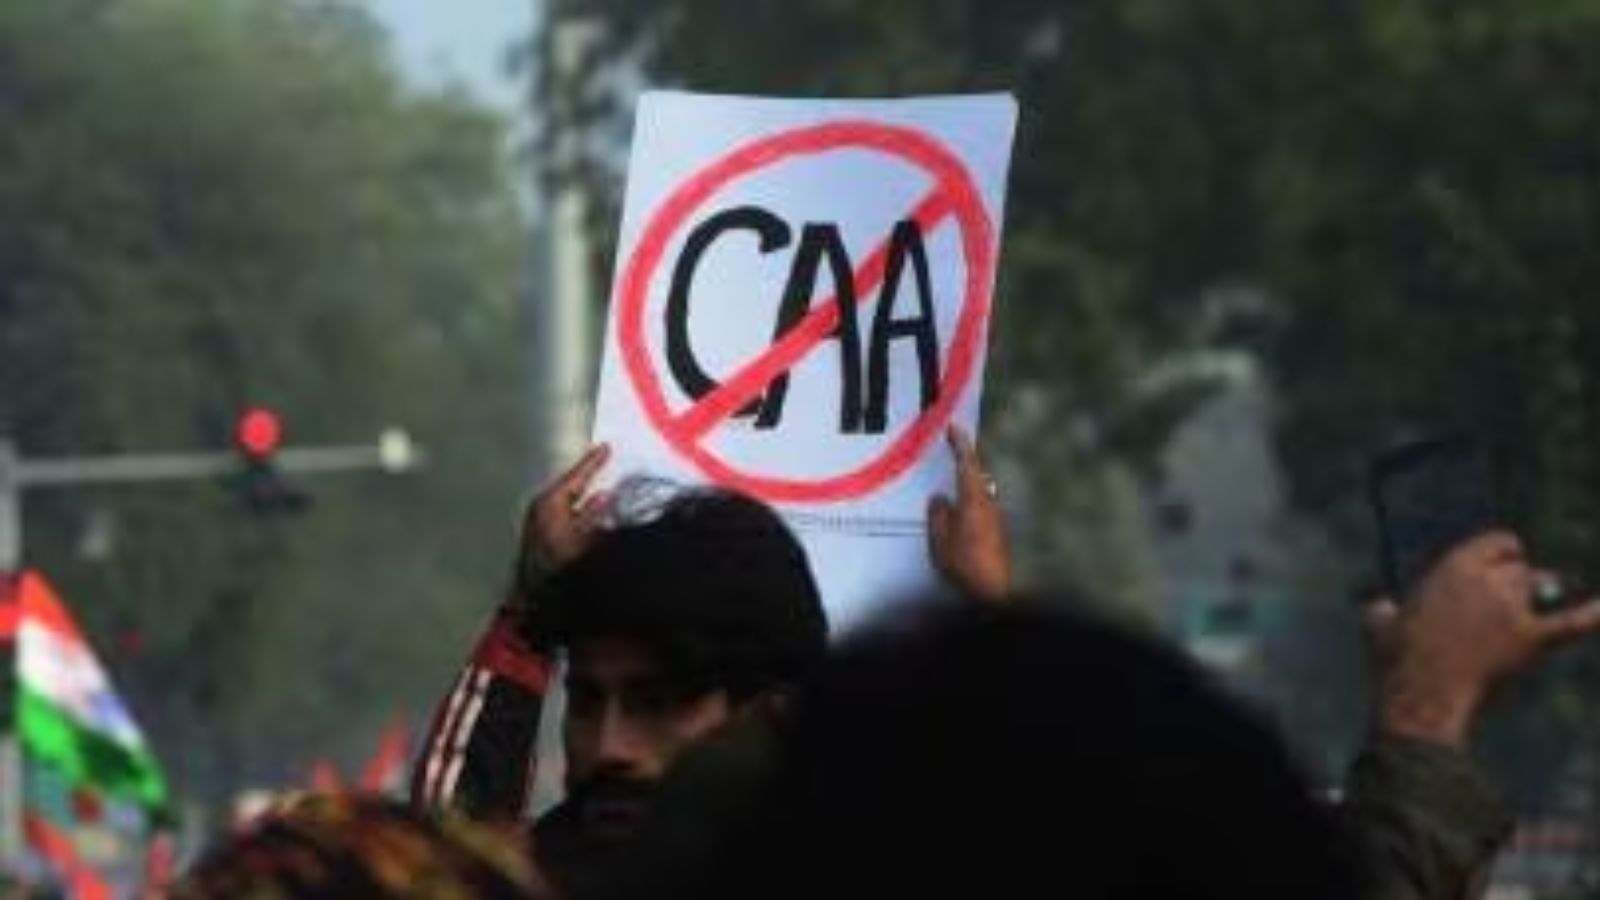 one more divisive issue caa